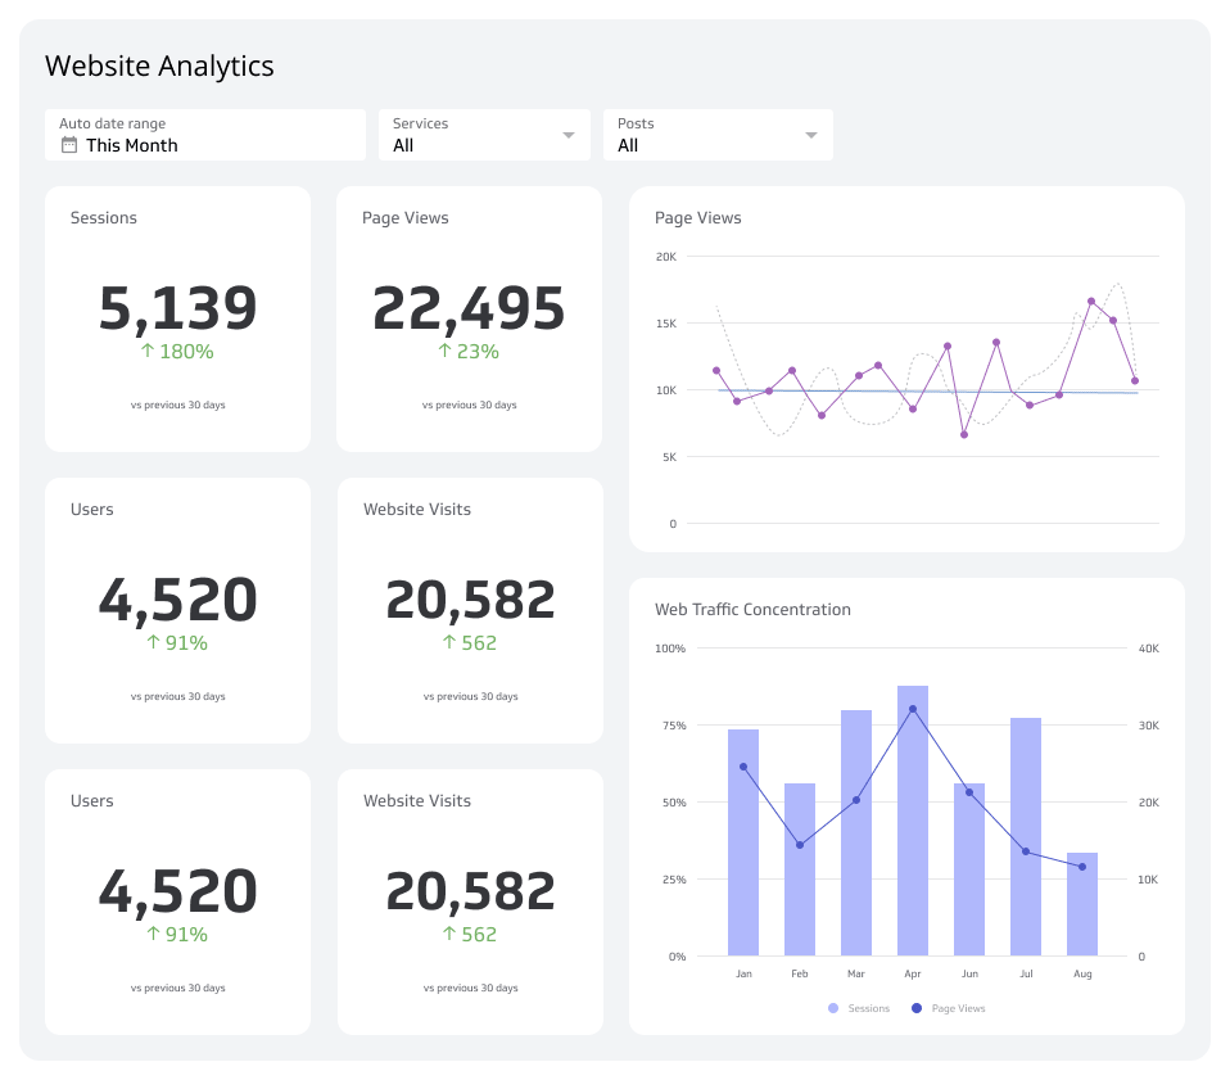 Related Dashboard Examples - Website Analytics Dashboard